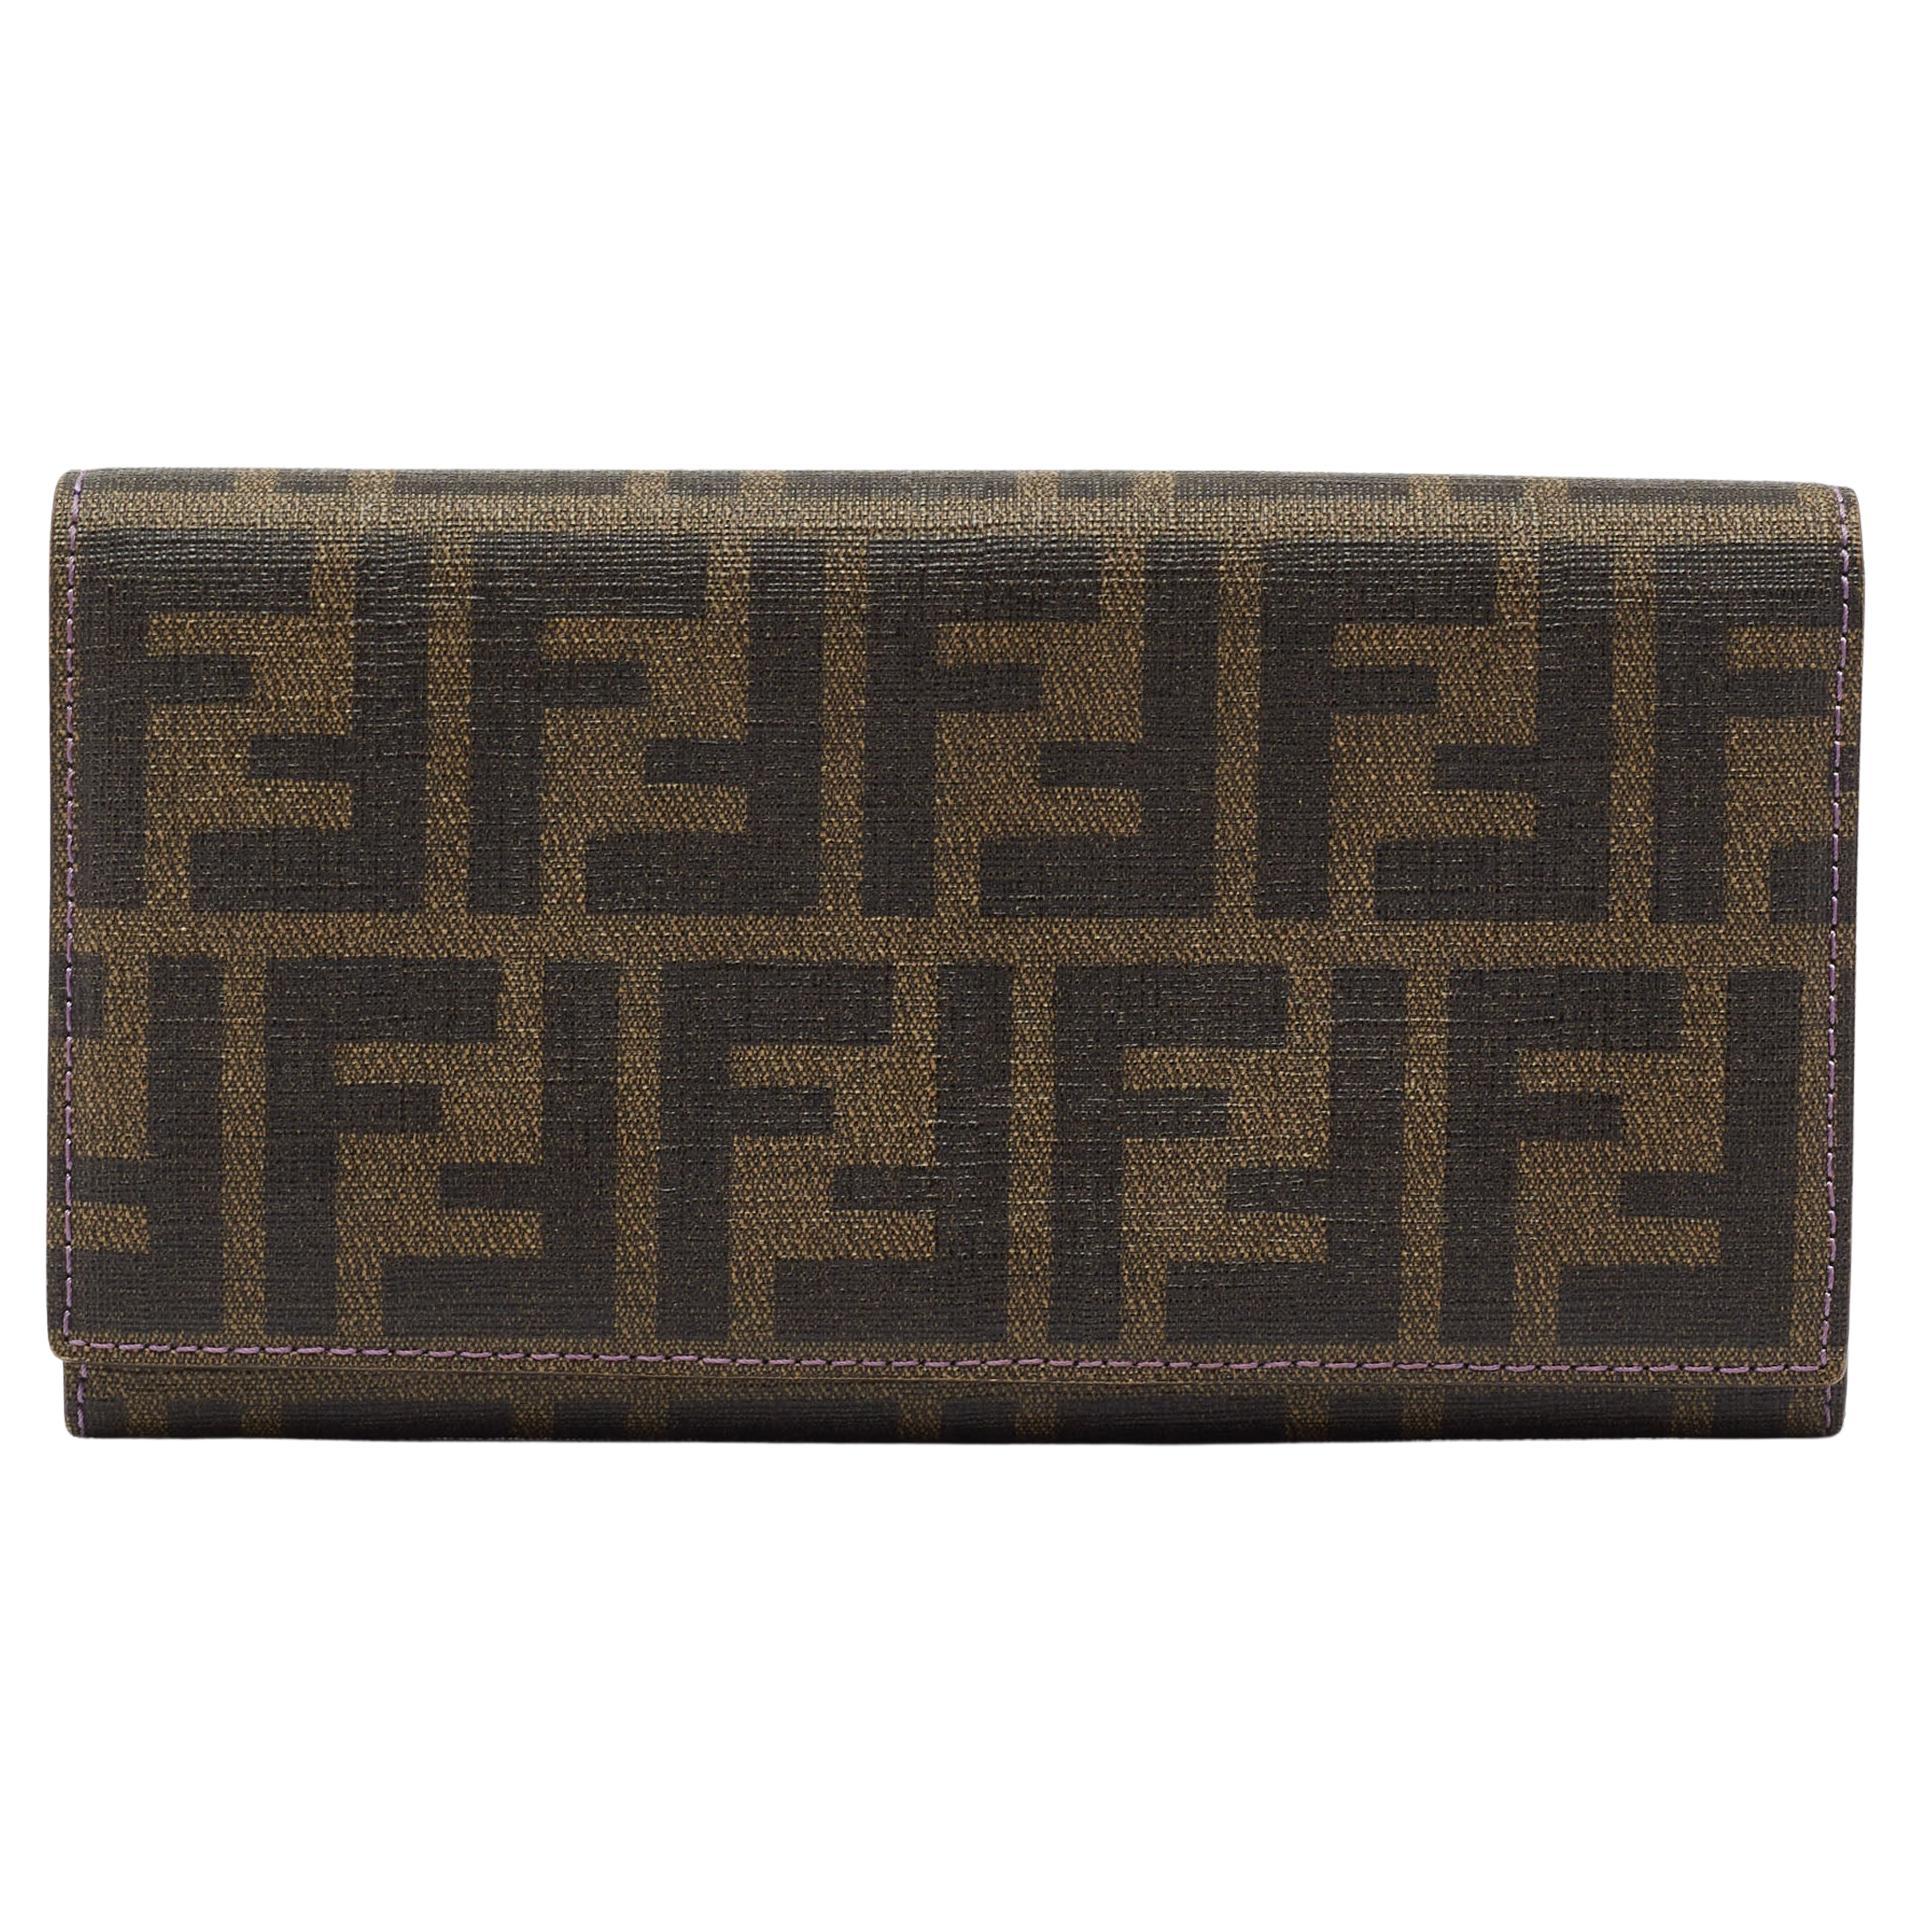 Fendi Tobacco Zucca Coated Canvas Flap Continental Wallet